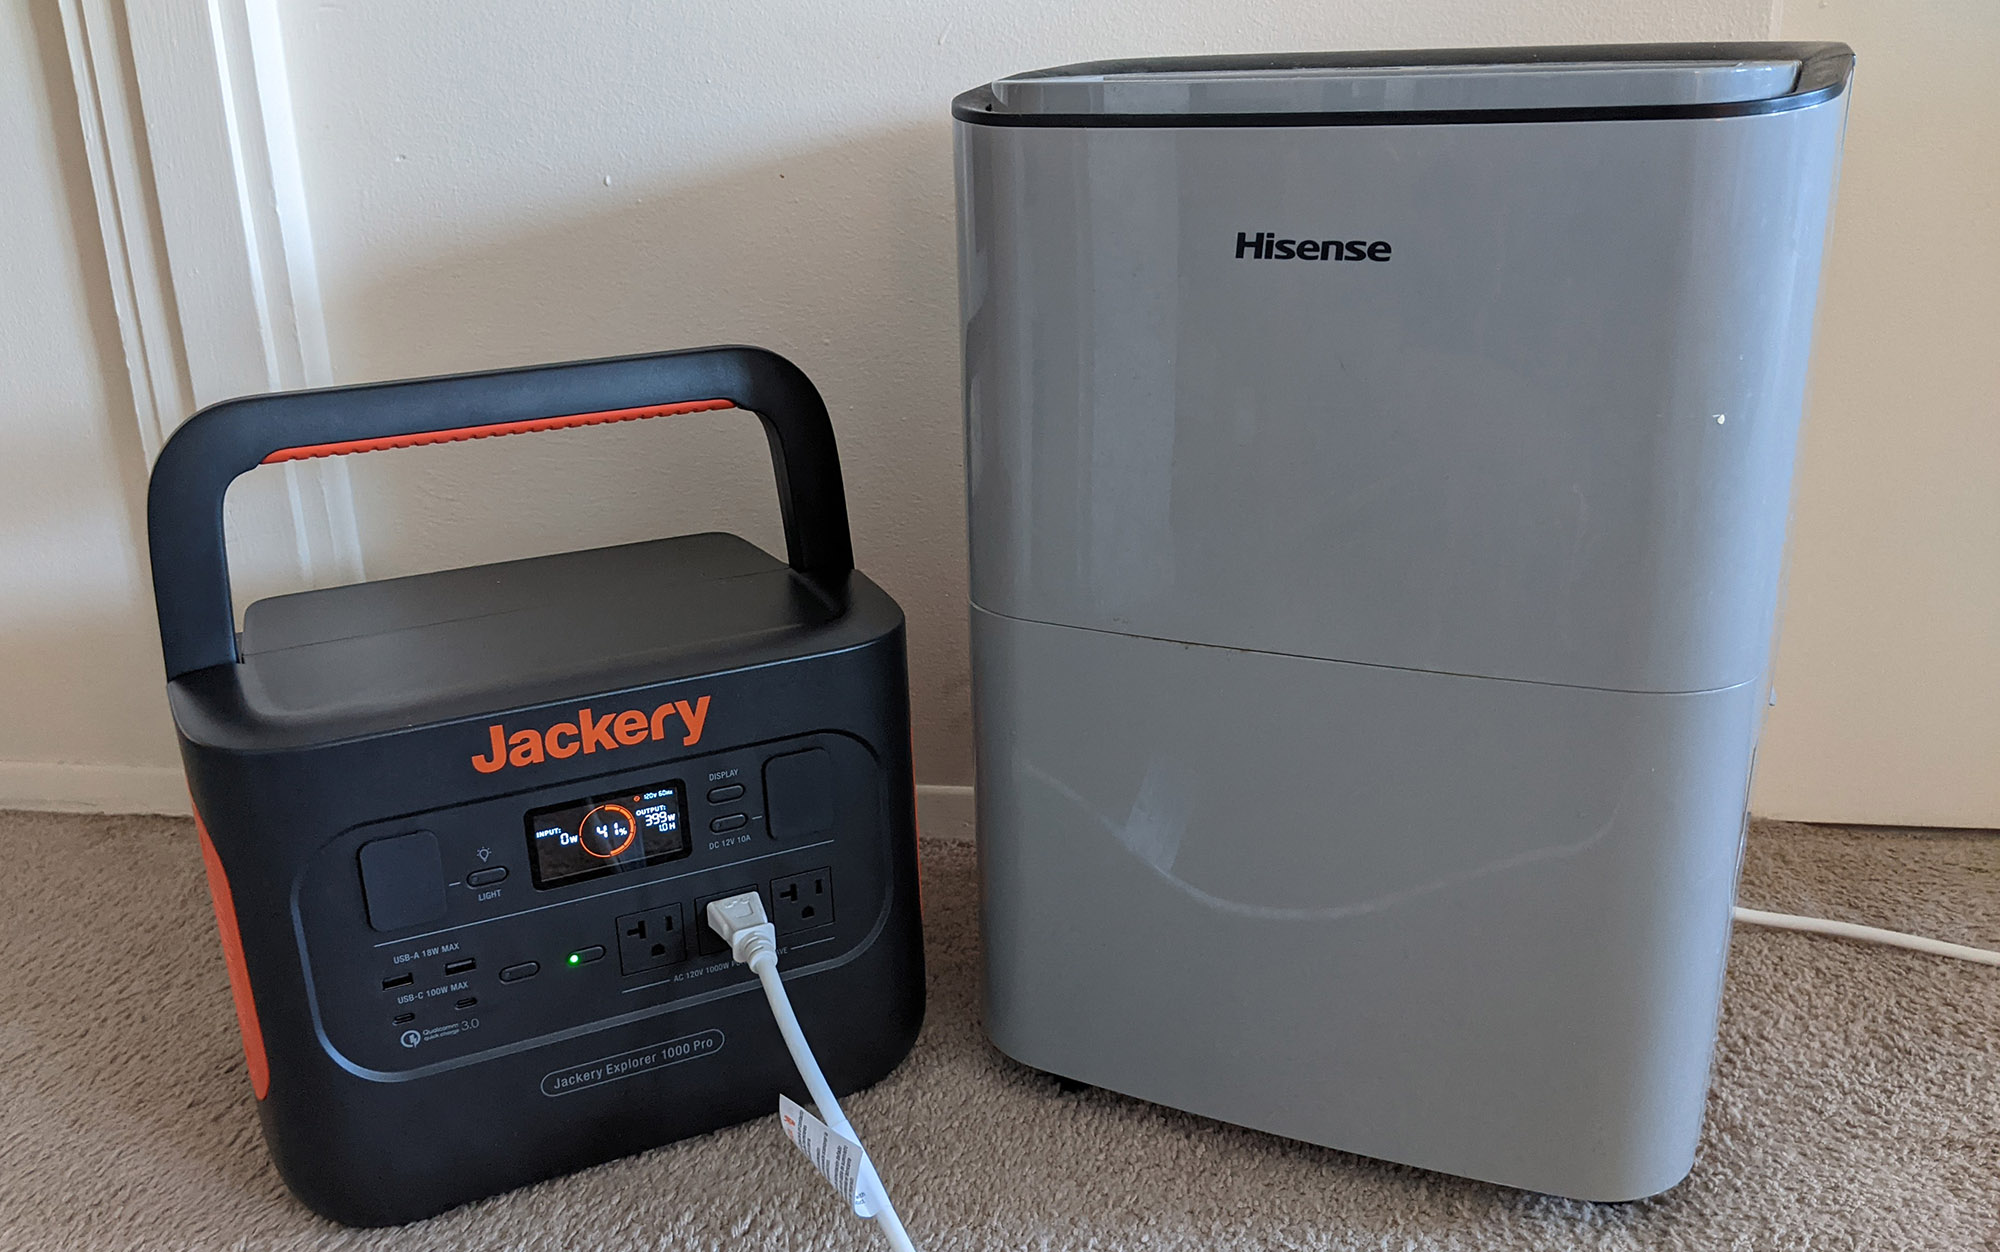 The Jackery 1000 Pro is capable of powering even power-hungry appliances, like this dehumidifier.